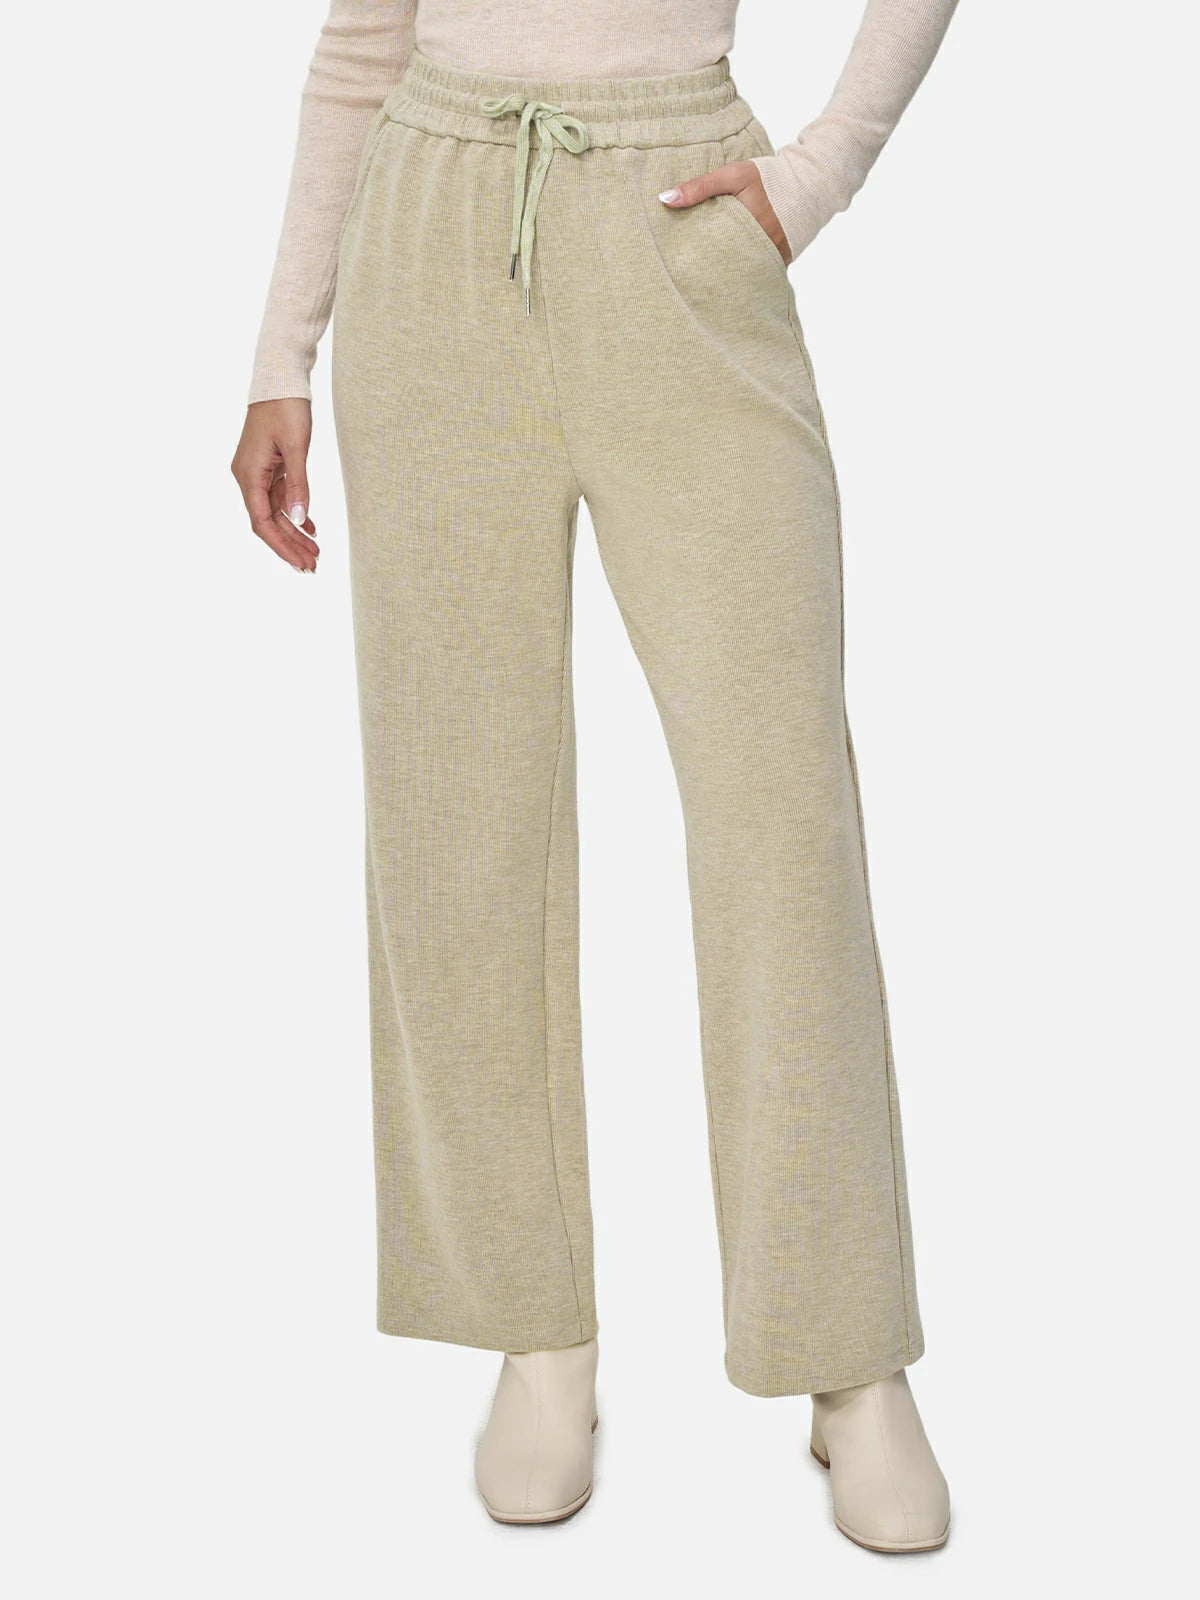 Comfortable Elegance: Experience the perfect blend of comfort and elegance in these knitted pants.